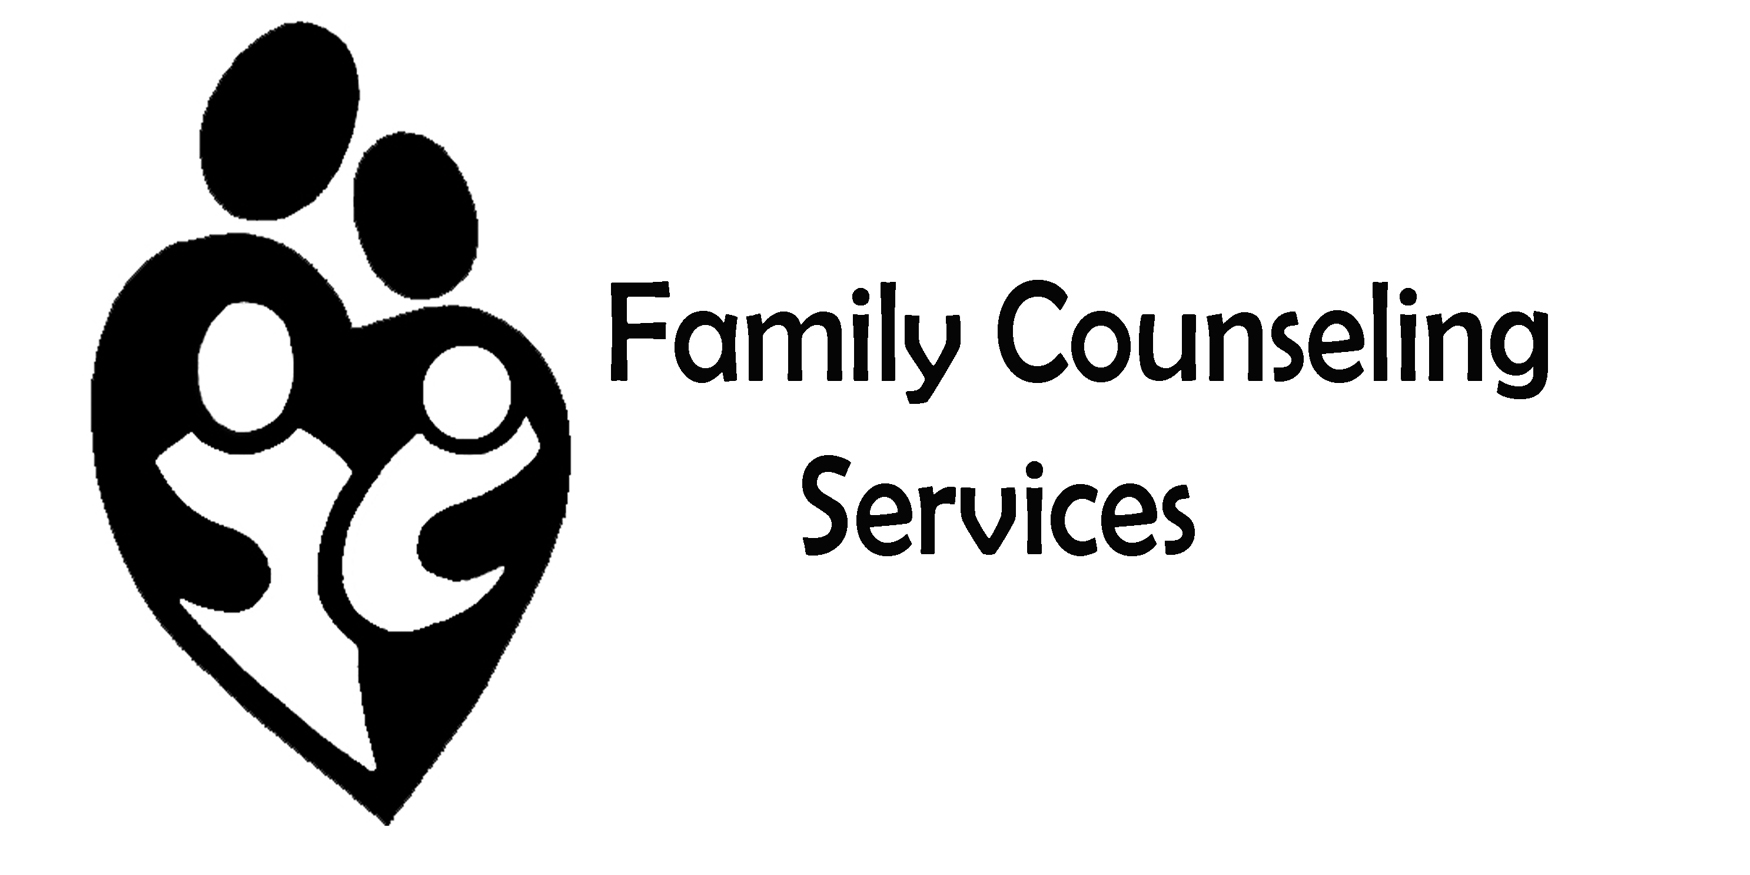 Family Counseling Services logo